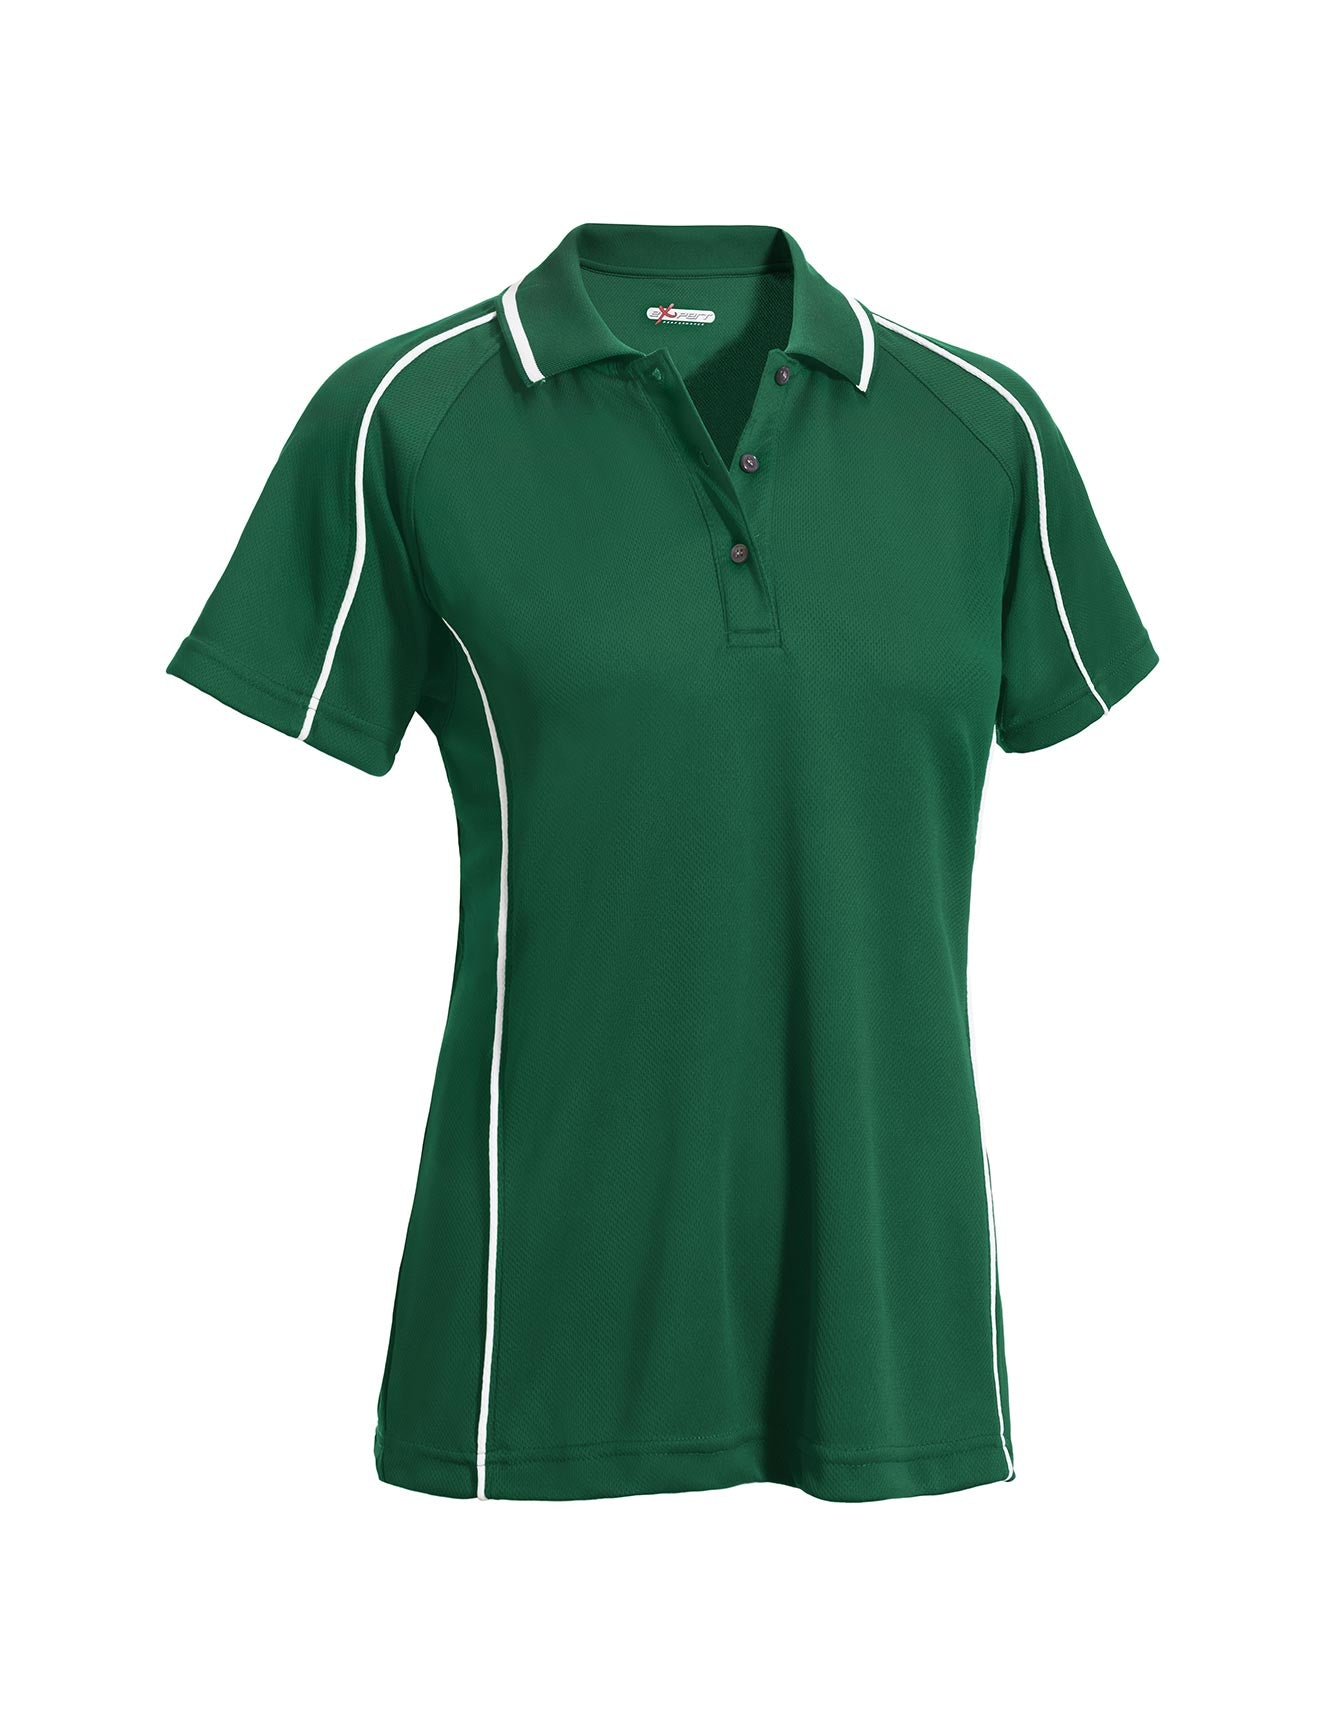 Expert Brand Wholesale Blank Polo Malibu Activewear Women's Forest Green Image 2#forest-green